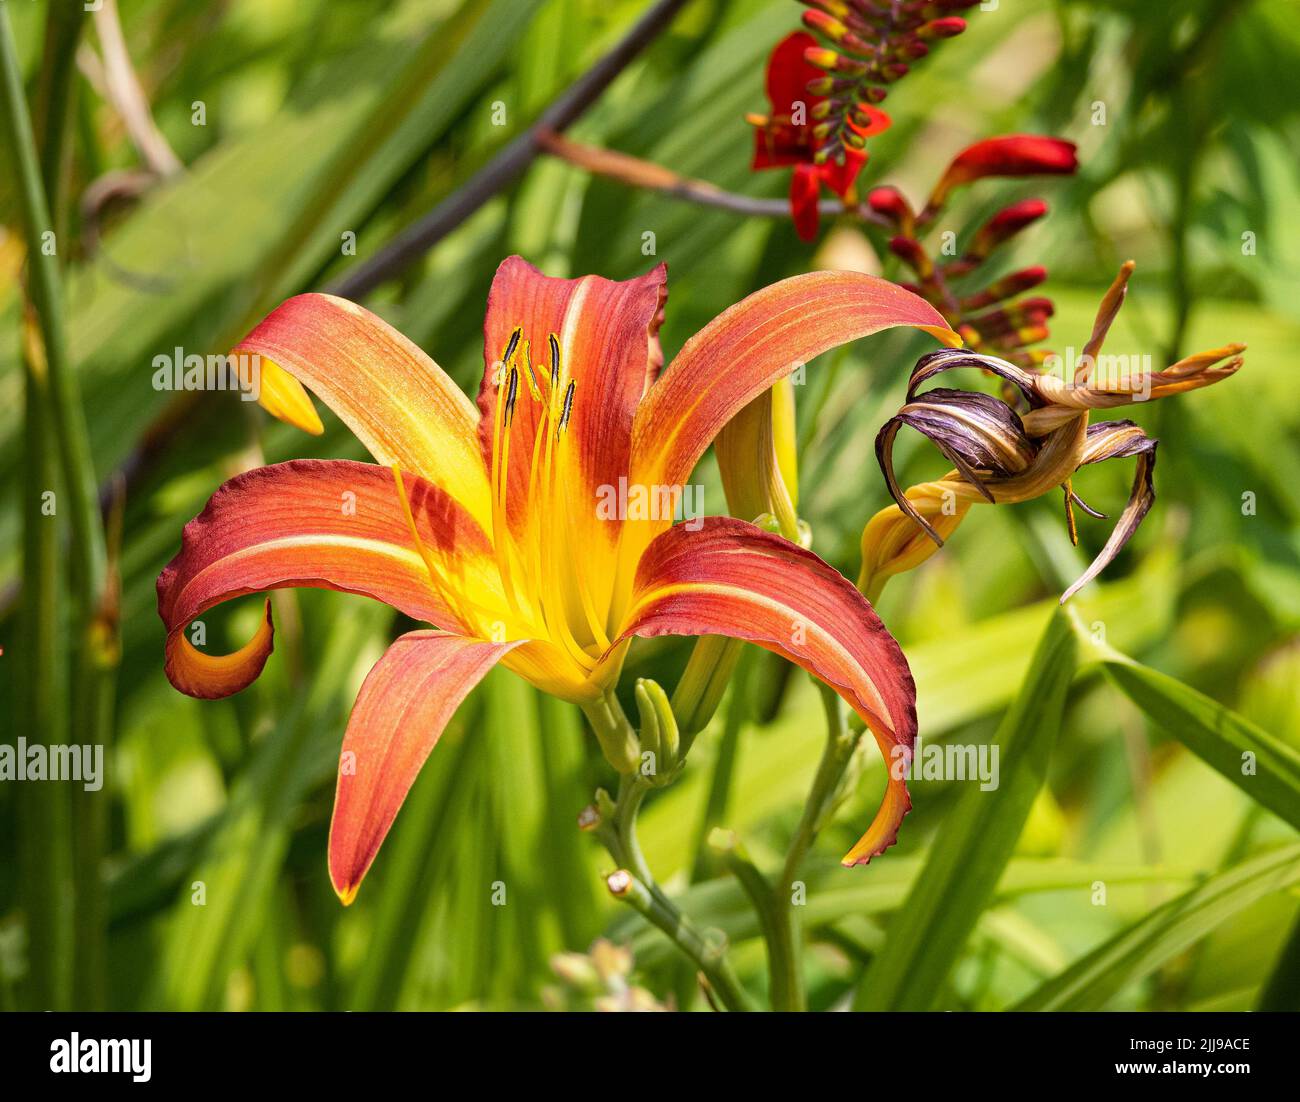 Burnt orange and yellow Hemerocallis or Day Lily in an herbaceous border of an English garden Stock Photo